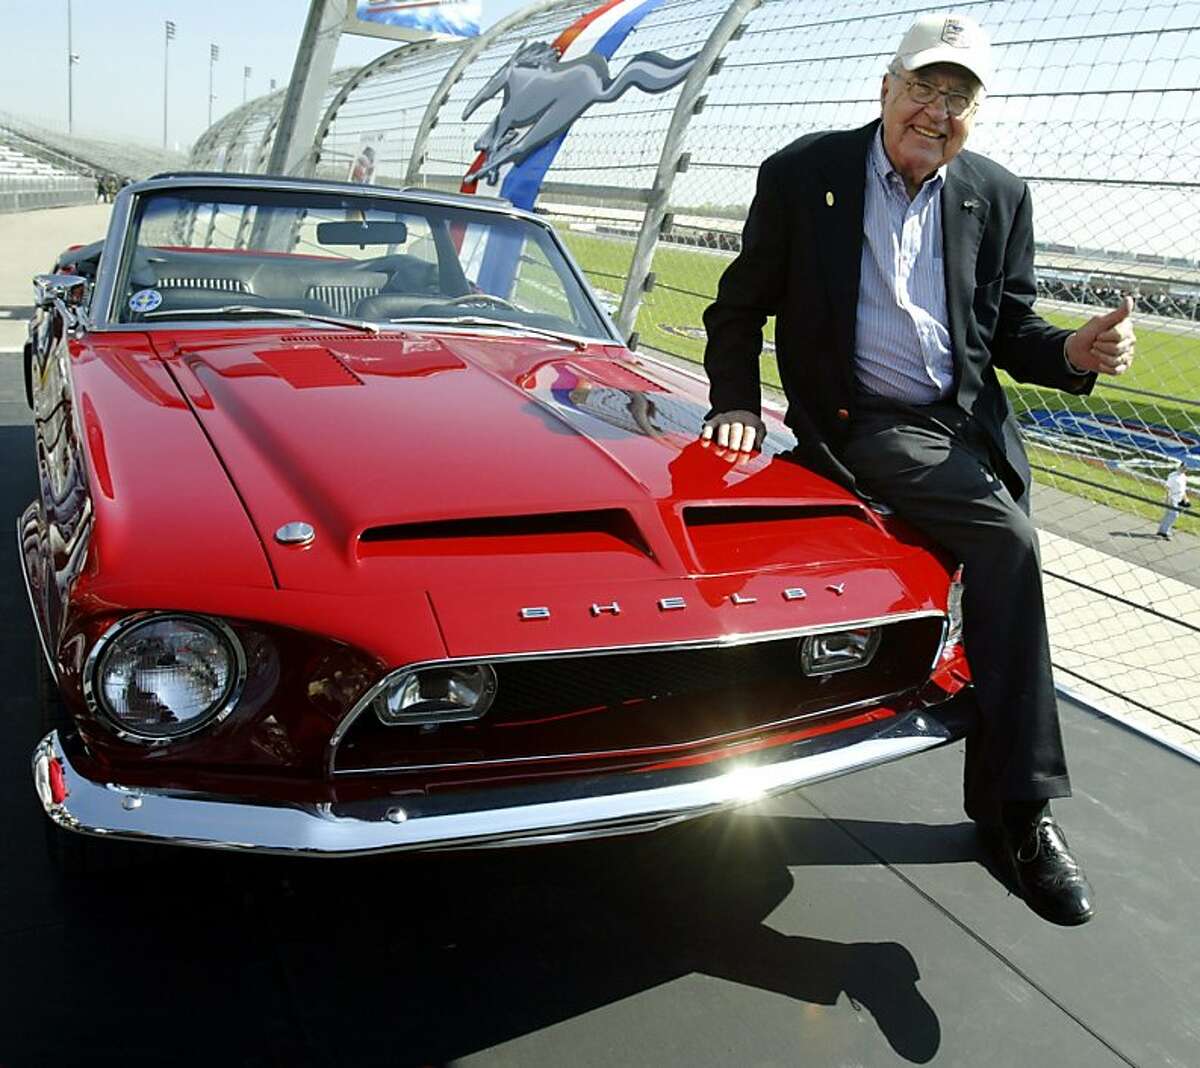 This April 15, 2004 file photo shows Carroll Shelby sitting on a 1968 GT500 KR during the celebration of the 40th Anniversary of the Ford Mustang at the Nashville Super Speedway in Lebanon, Tennessee. Shelby, the greatest single influence on America's racing posture in the post-1945 period with help in the engine design and racing operations of the Mustang, died May 10, 2012 at the age of 89.